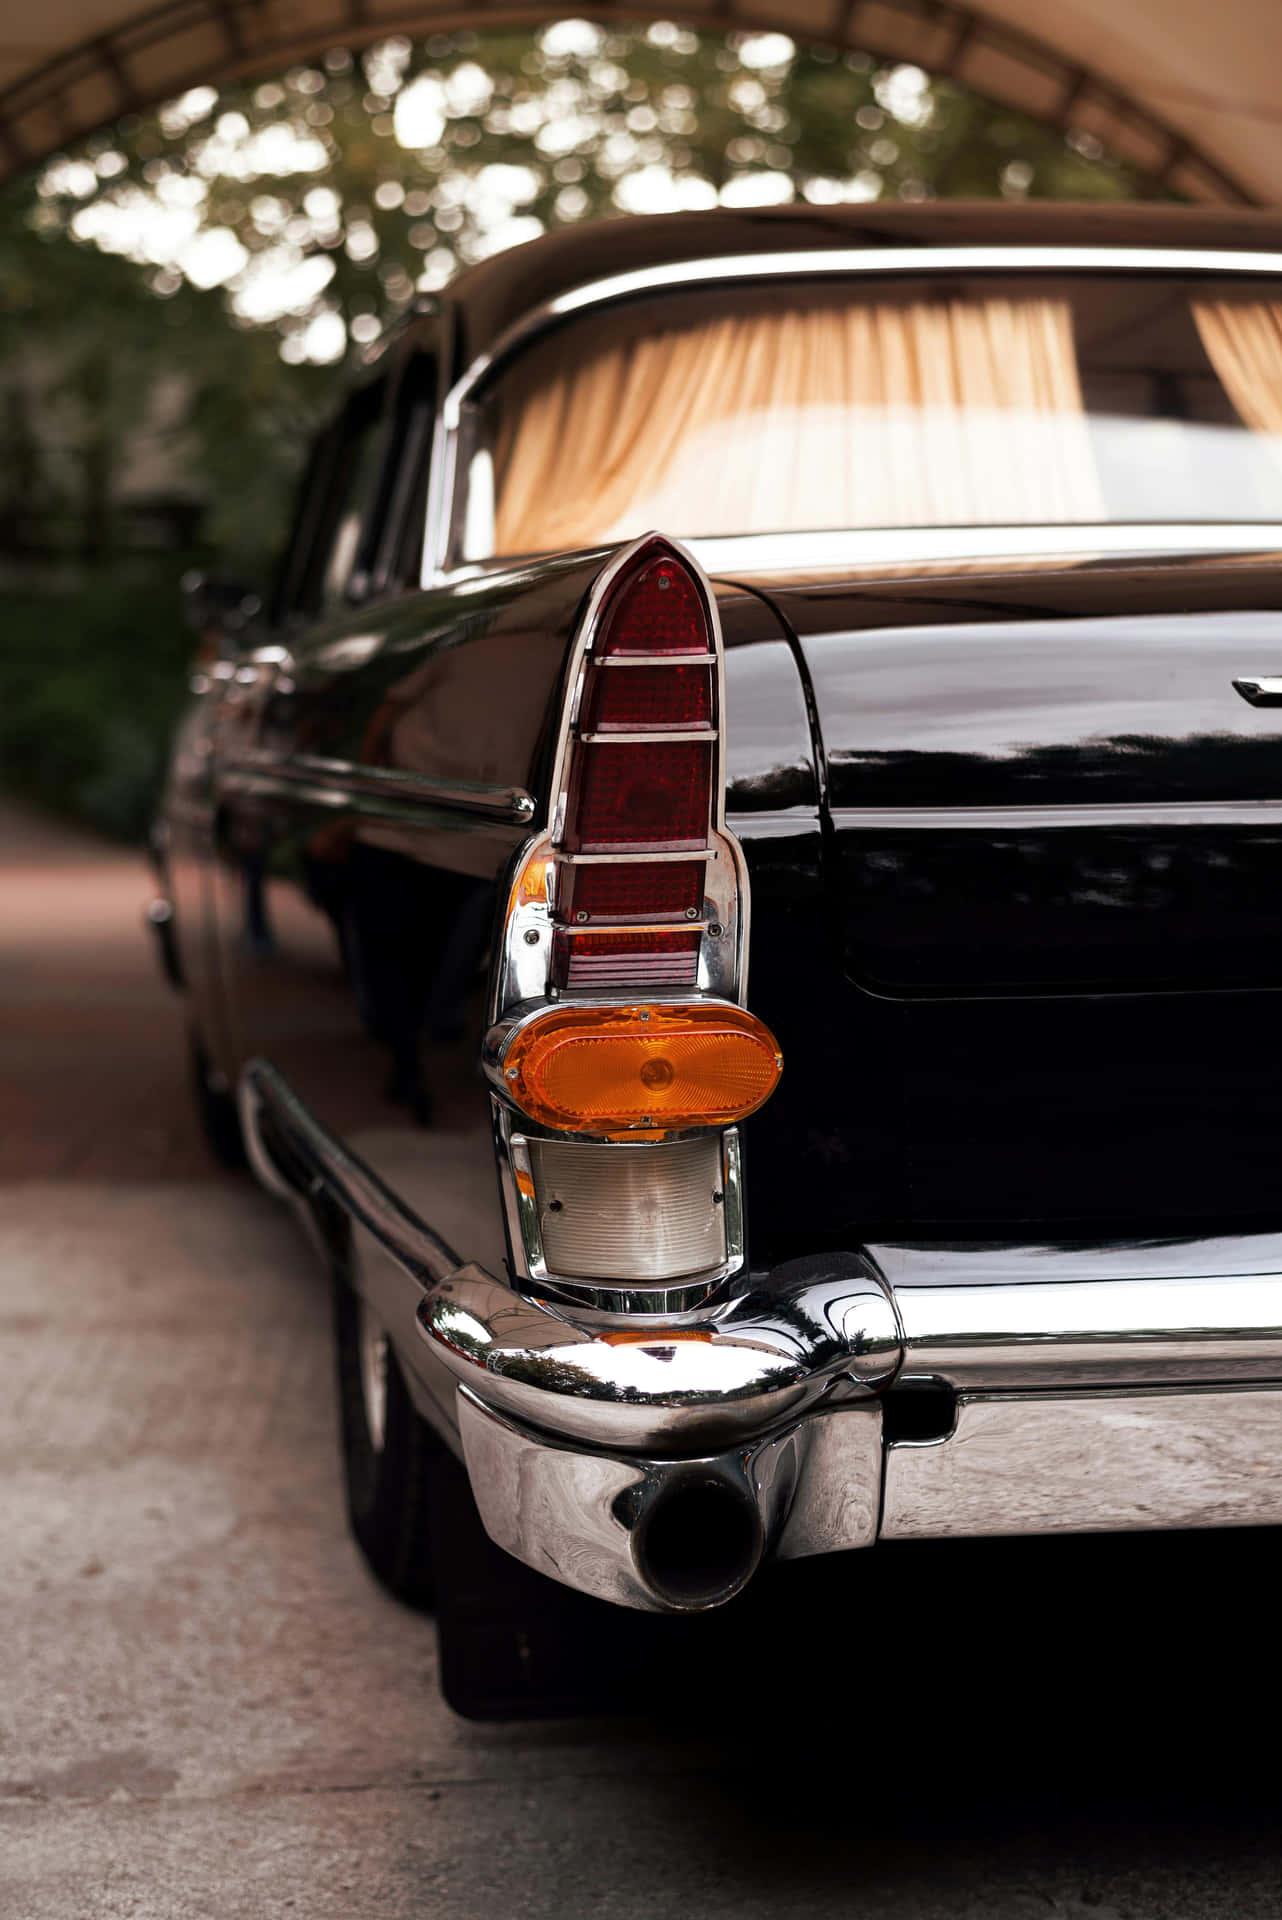 Vintage Black Car Taillight Photography Wallpaper